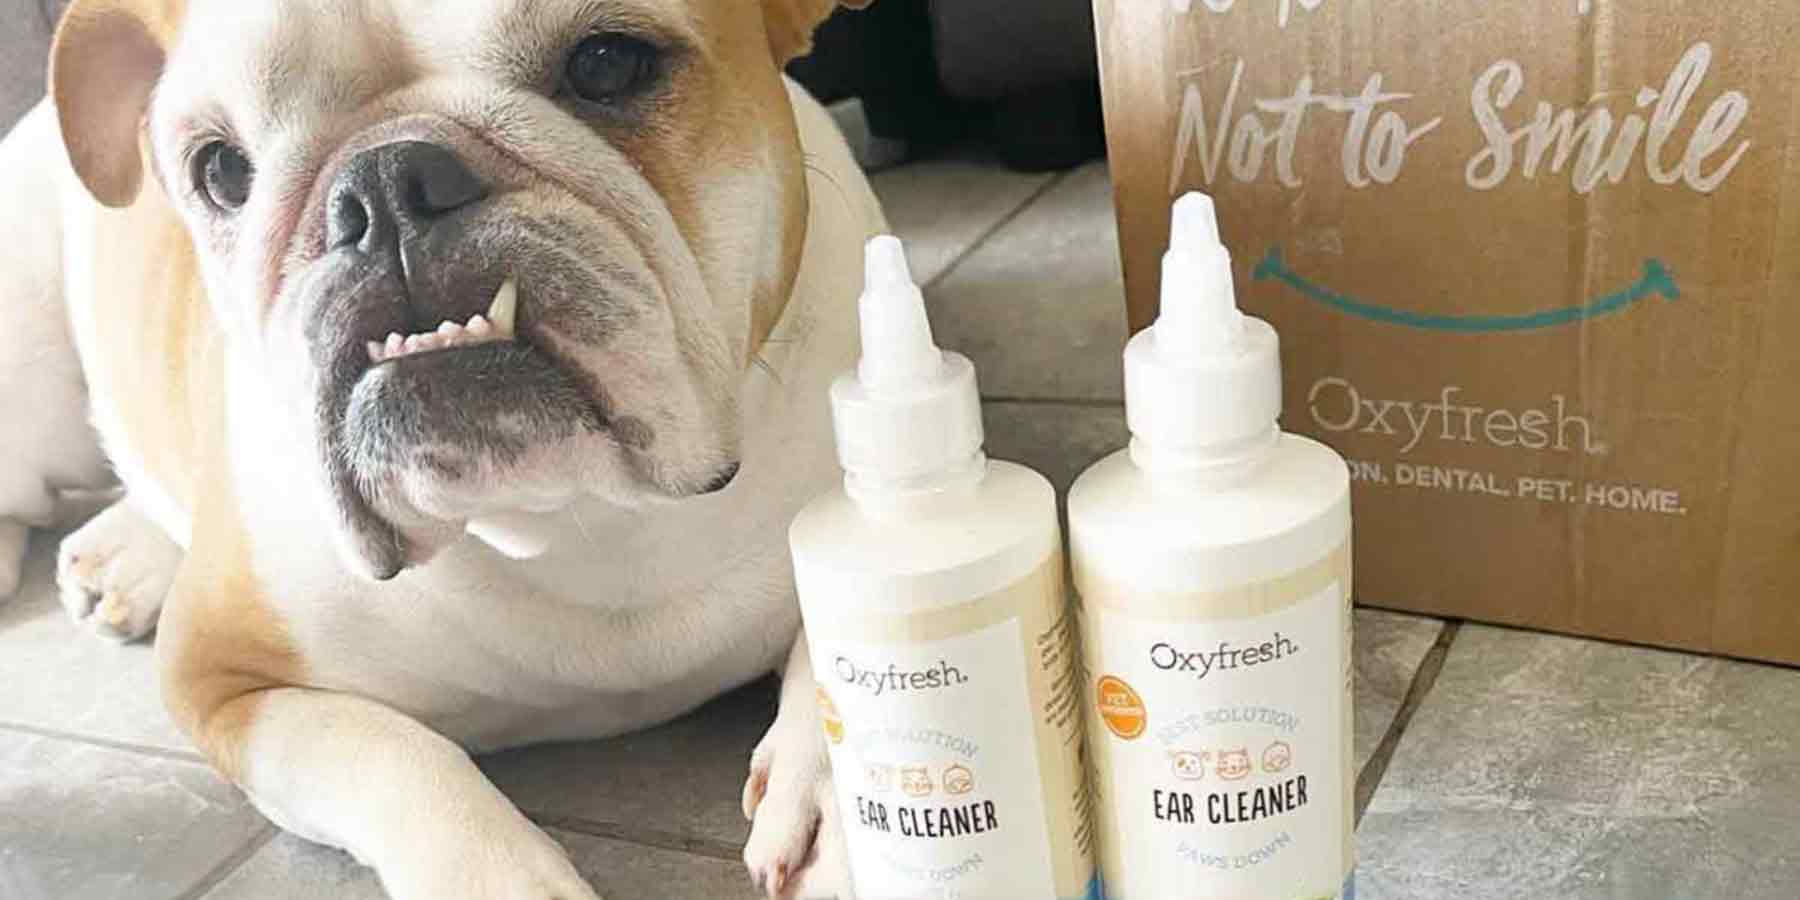 Social-Media-Post-From-Instagram-User-_bella_englishbulldog_-laying-on-the-floor-next-to-two-bottles-of-oxyfresh-cat-dog-ear-cleaner-for-stinky-ear-and-wax-dirt-next-to-the-shipping-package-that-says-we-dare-you-not-to